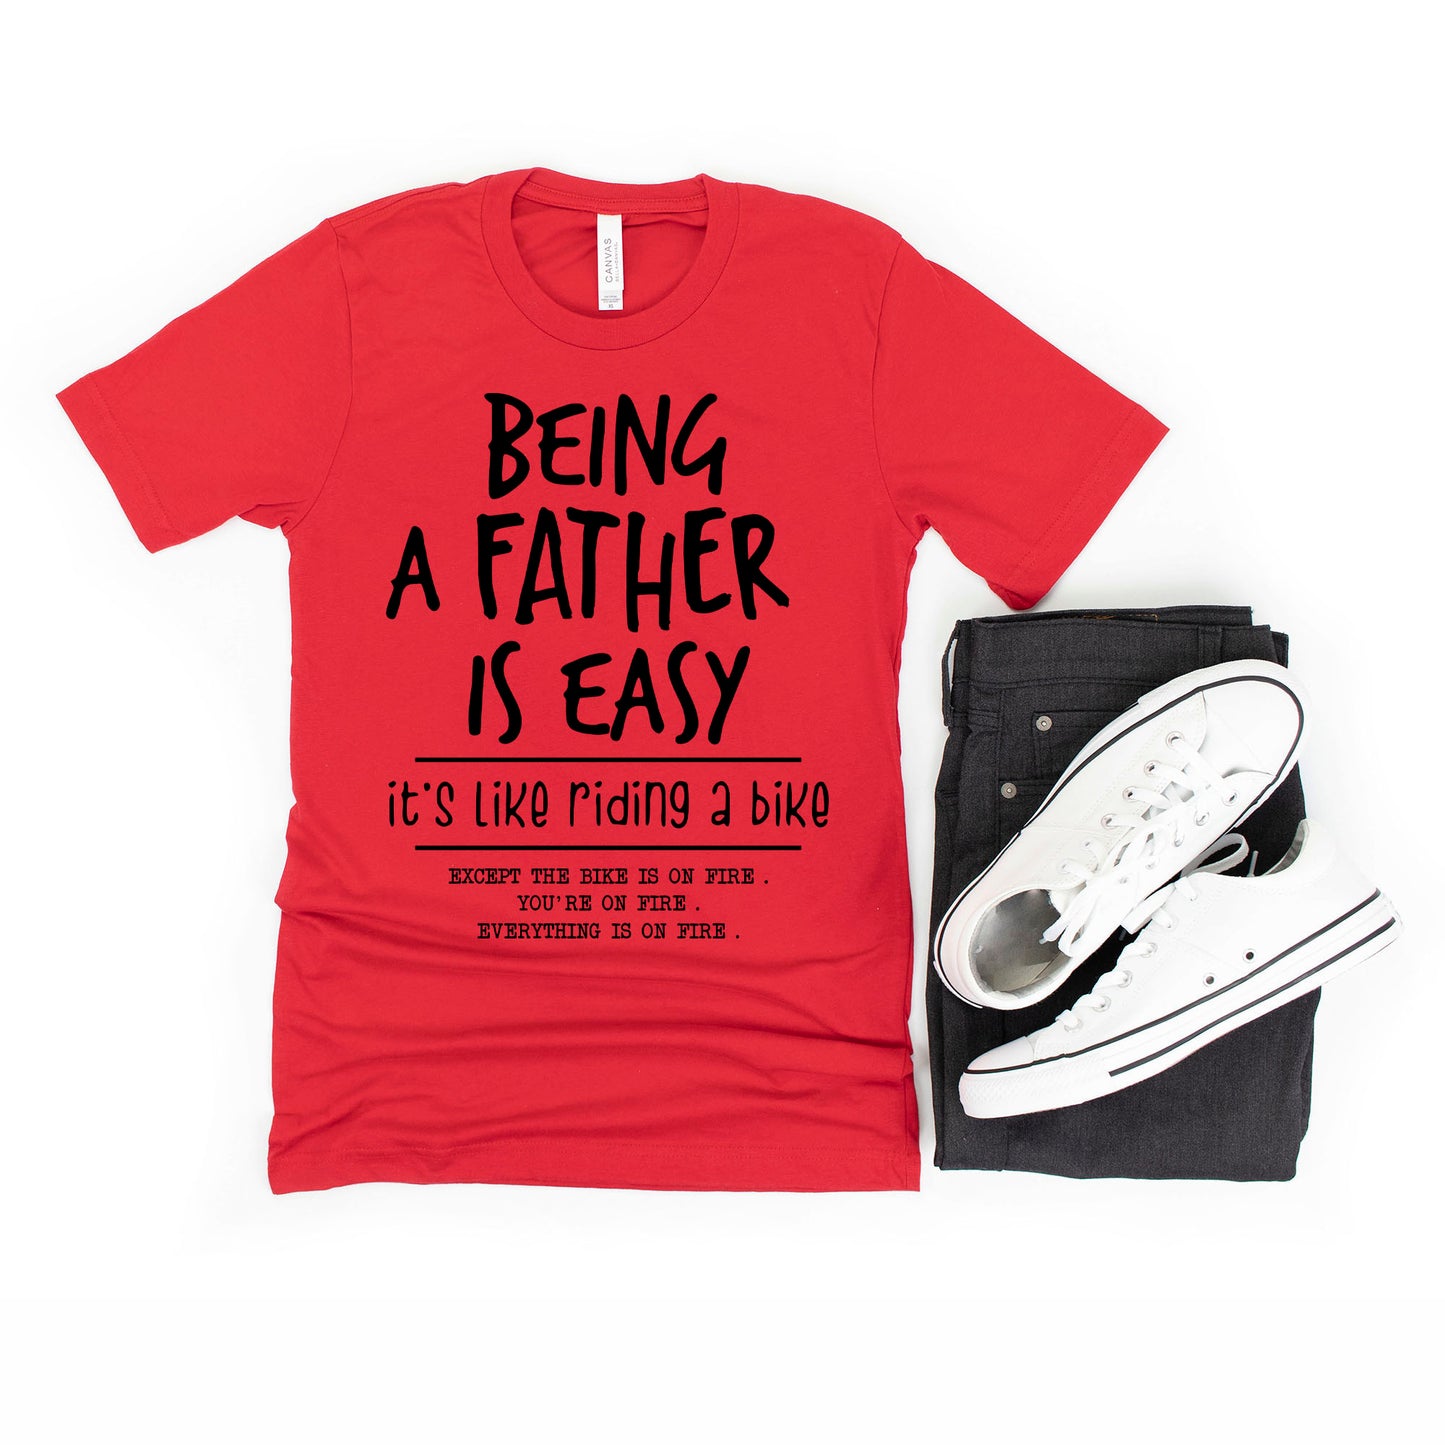 Being A Father Is Easy | Short Sleeve Crew Neck